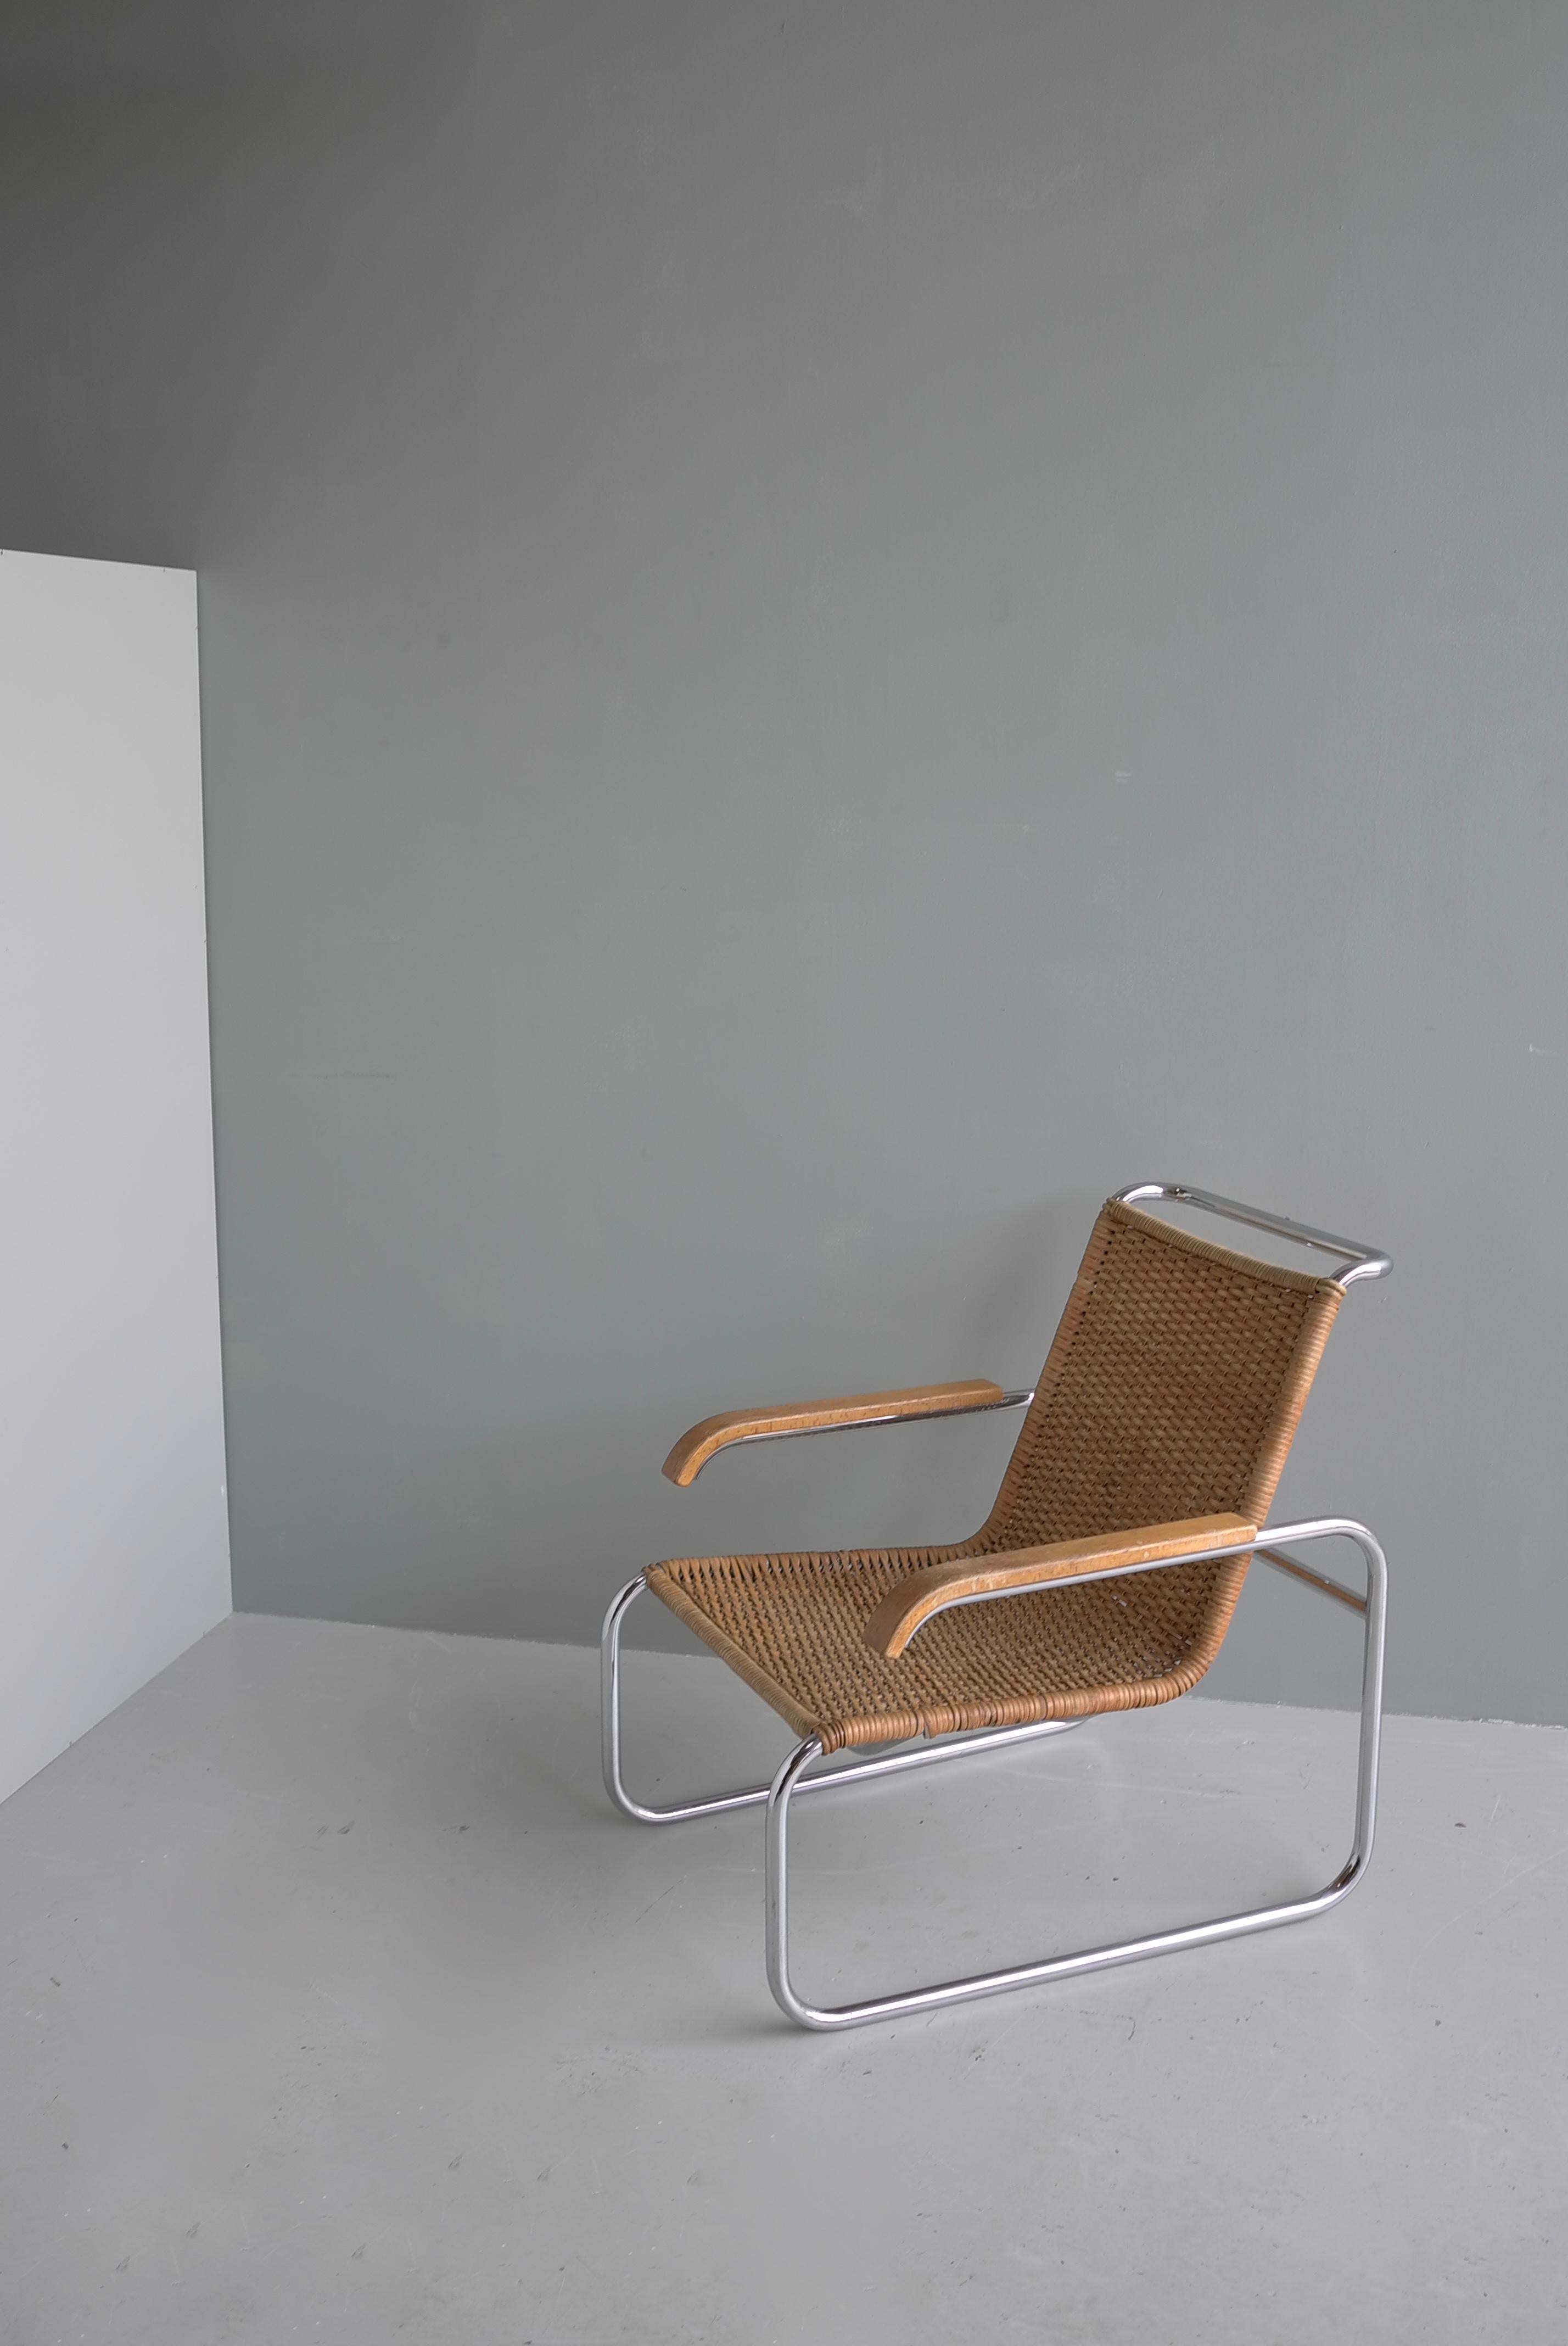 Mid-Century Modern Marcel Breuer B35 Wicker and Chrome Armchair by Thonet 1960's For Sale